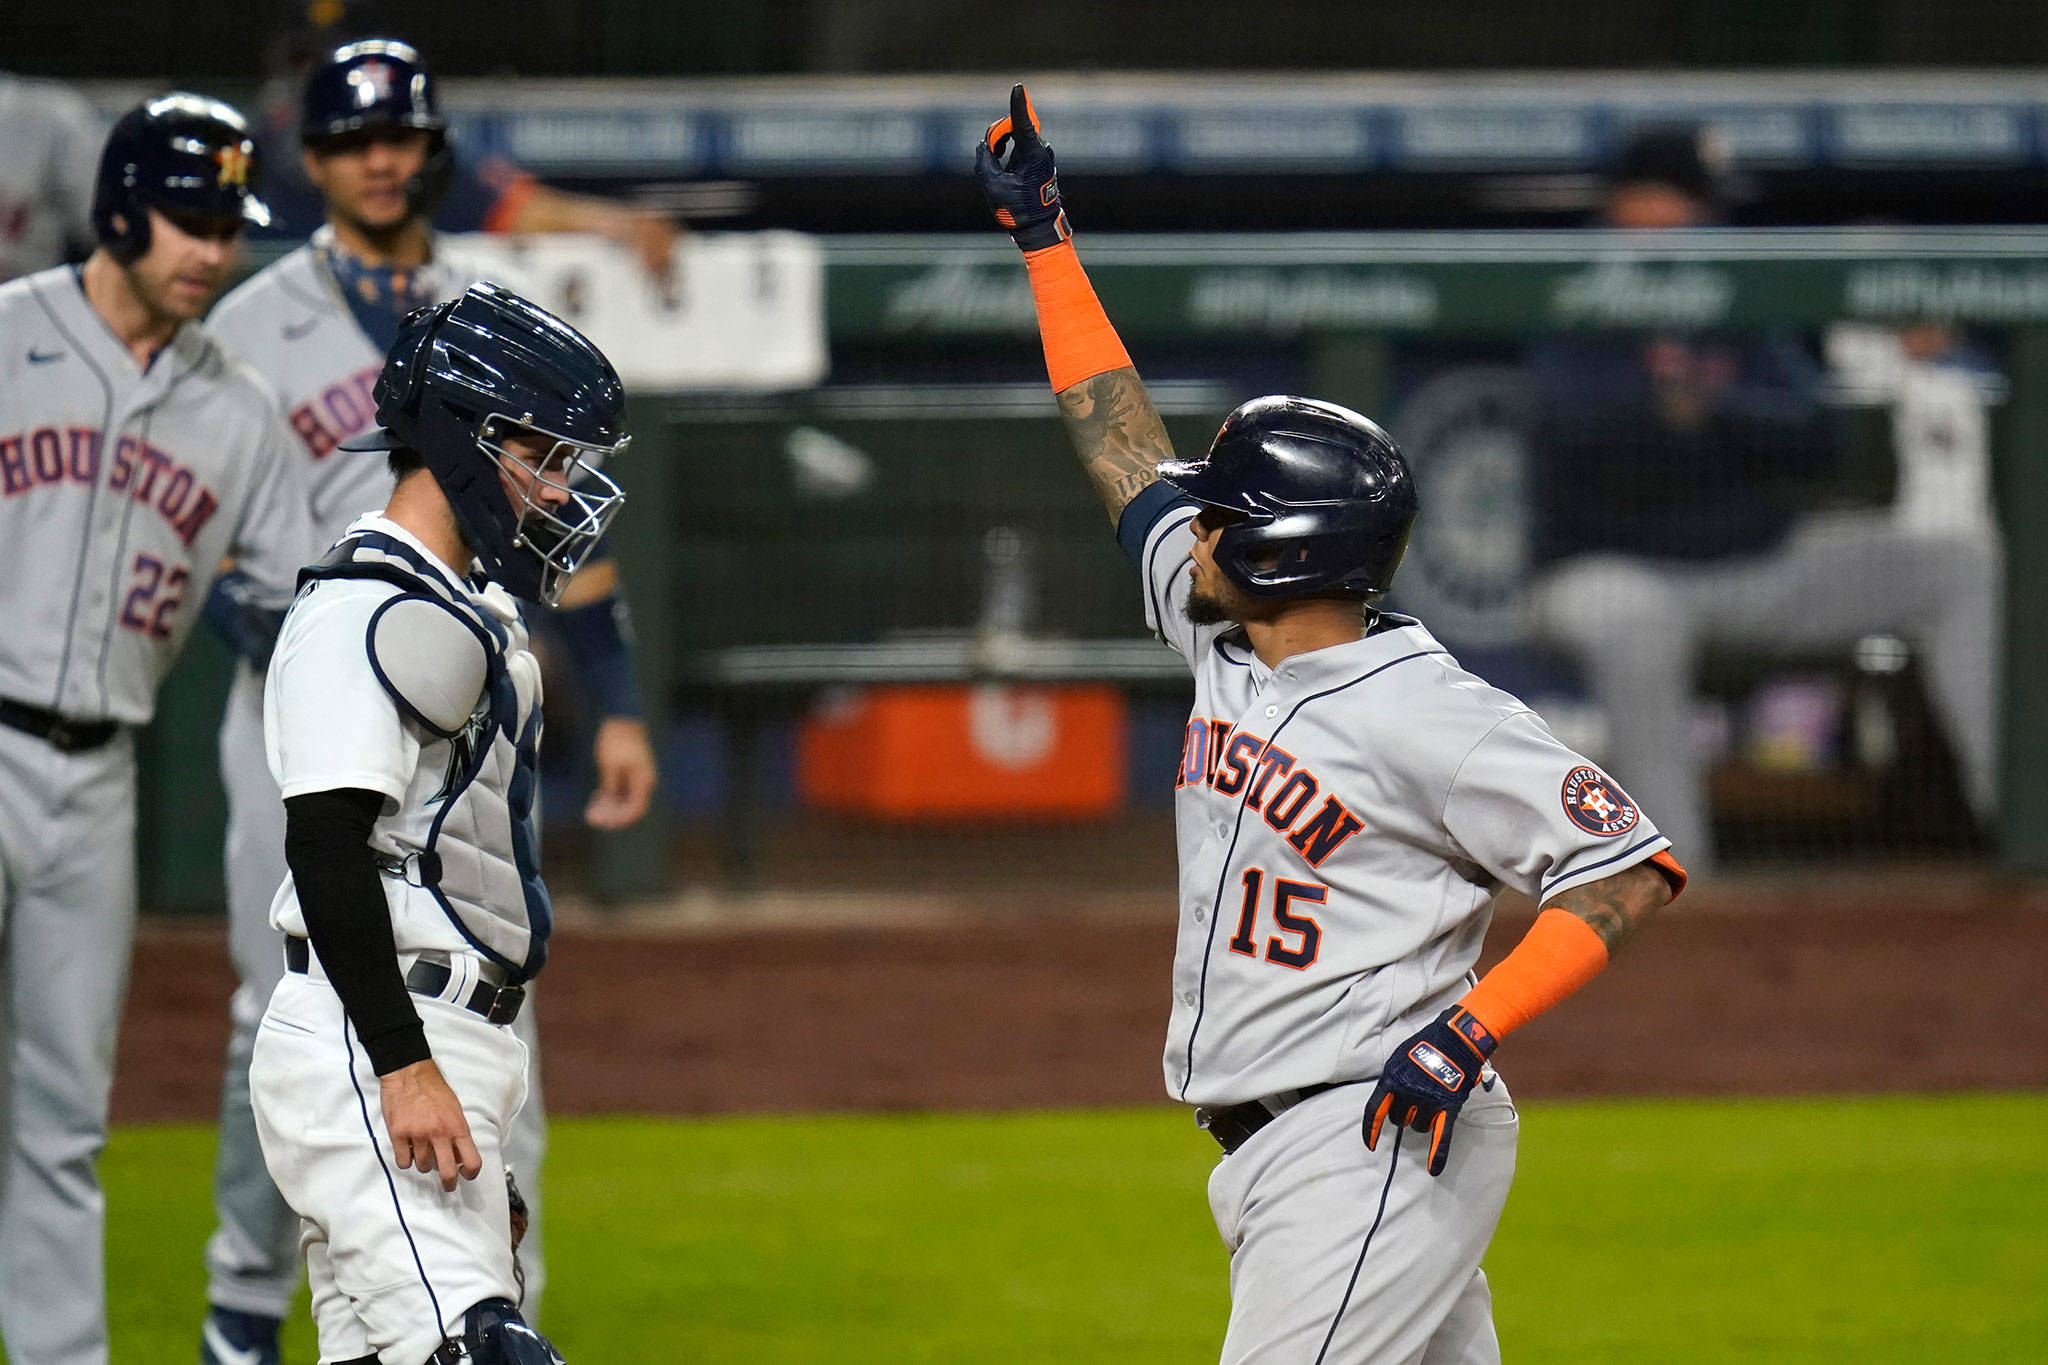 The Astros’ Martin Maldonado (15) celebrates as he crosses home plate in front of Mariners catcher catcher Luis Torrens after his three-run home run during the sixth inning of a game Sept. 22, 2020, in Seattle. (AP Photo/Elaine Thompson)